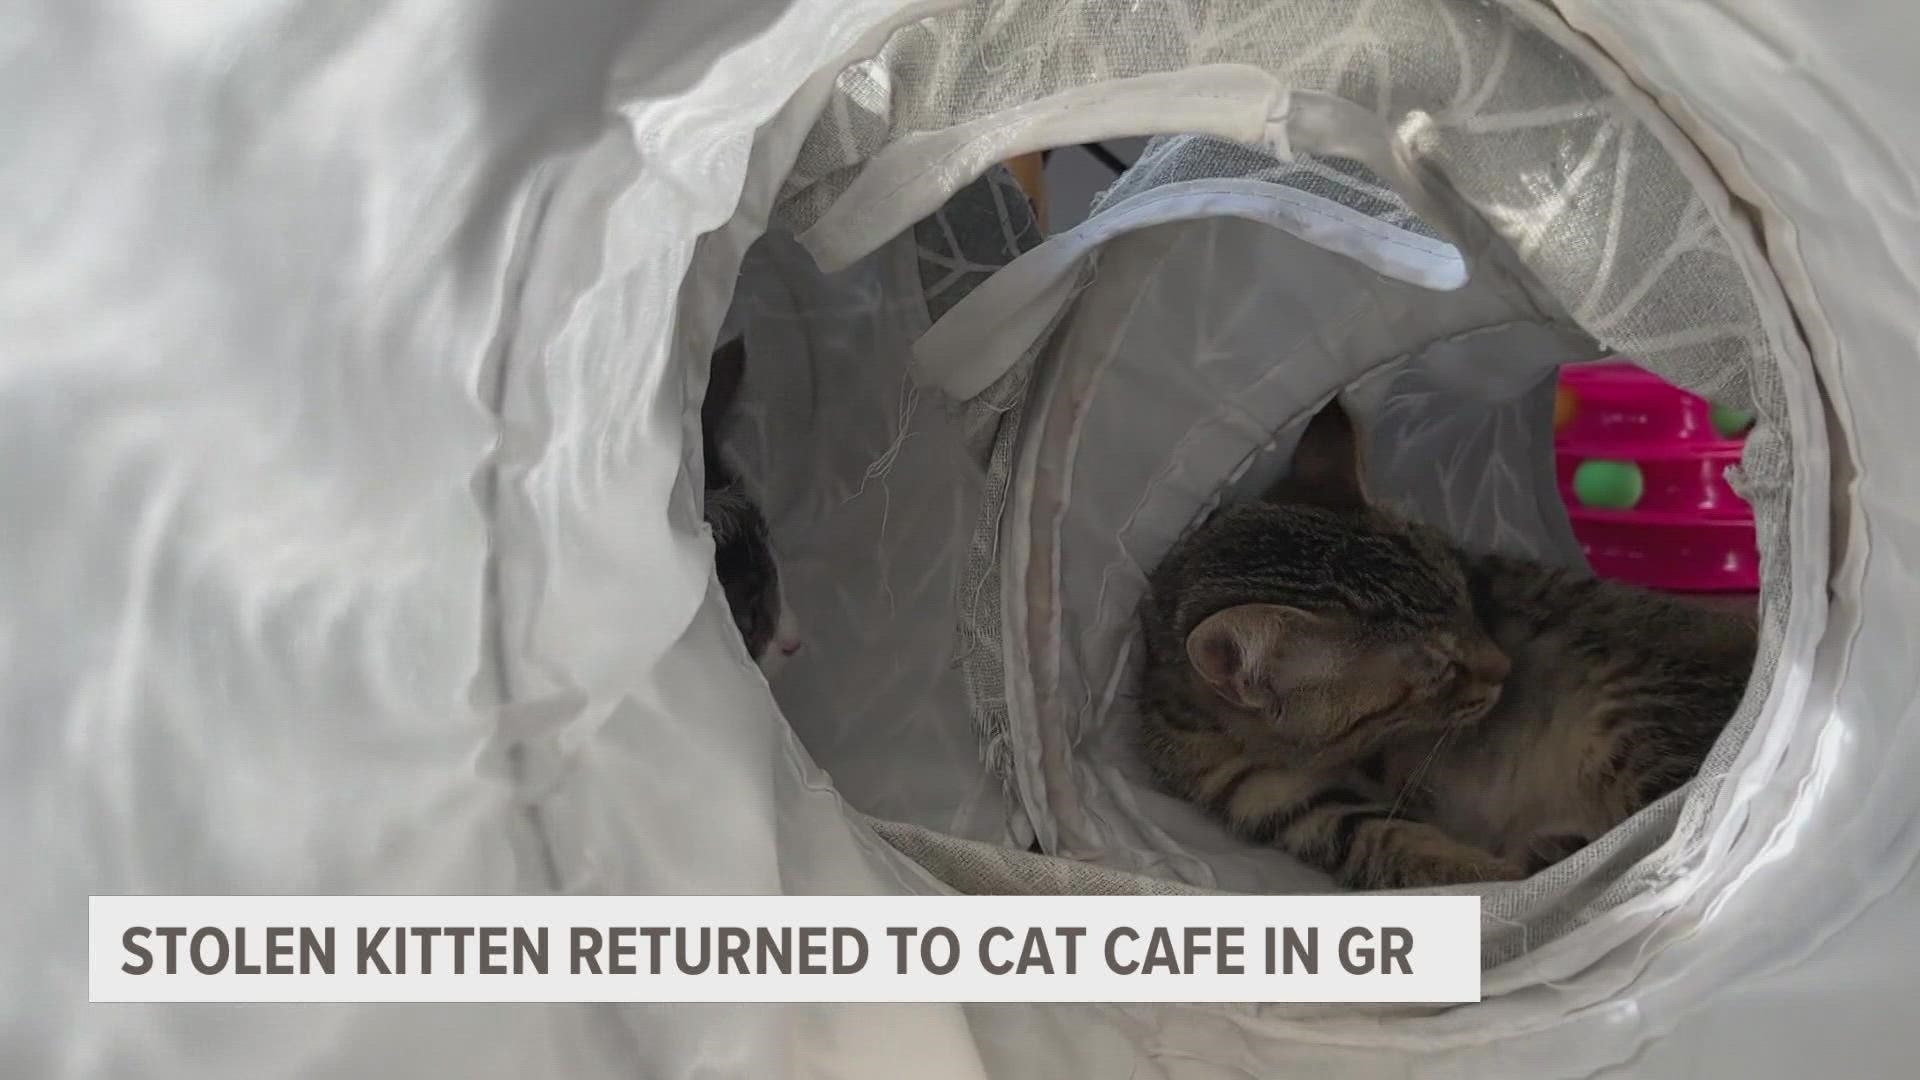 A stolen kitten in Grand Rapids has been found and reunited with a Cat Café after being gone for nearly a week.